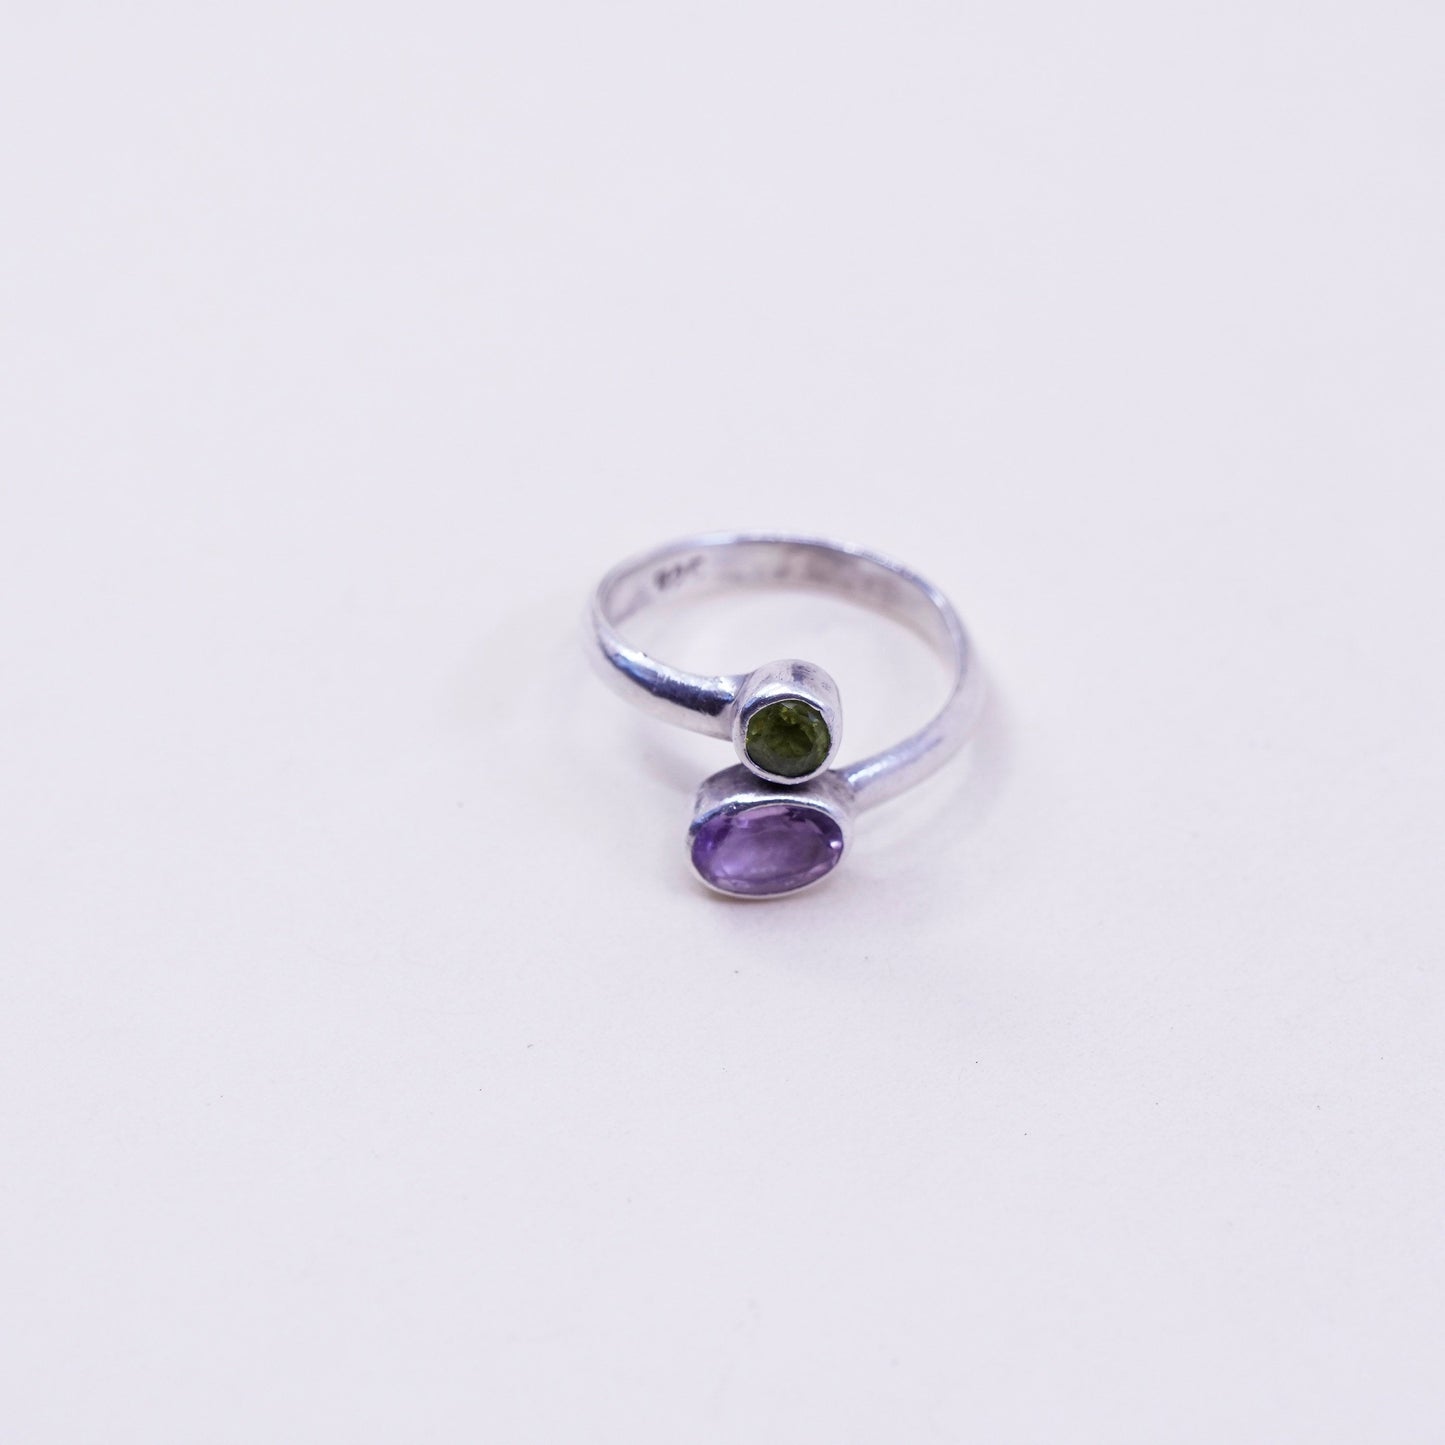 Size 5.75, Vintage sterling 925 silver handmade wrap band ring peridot amethyst